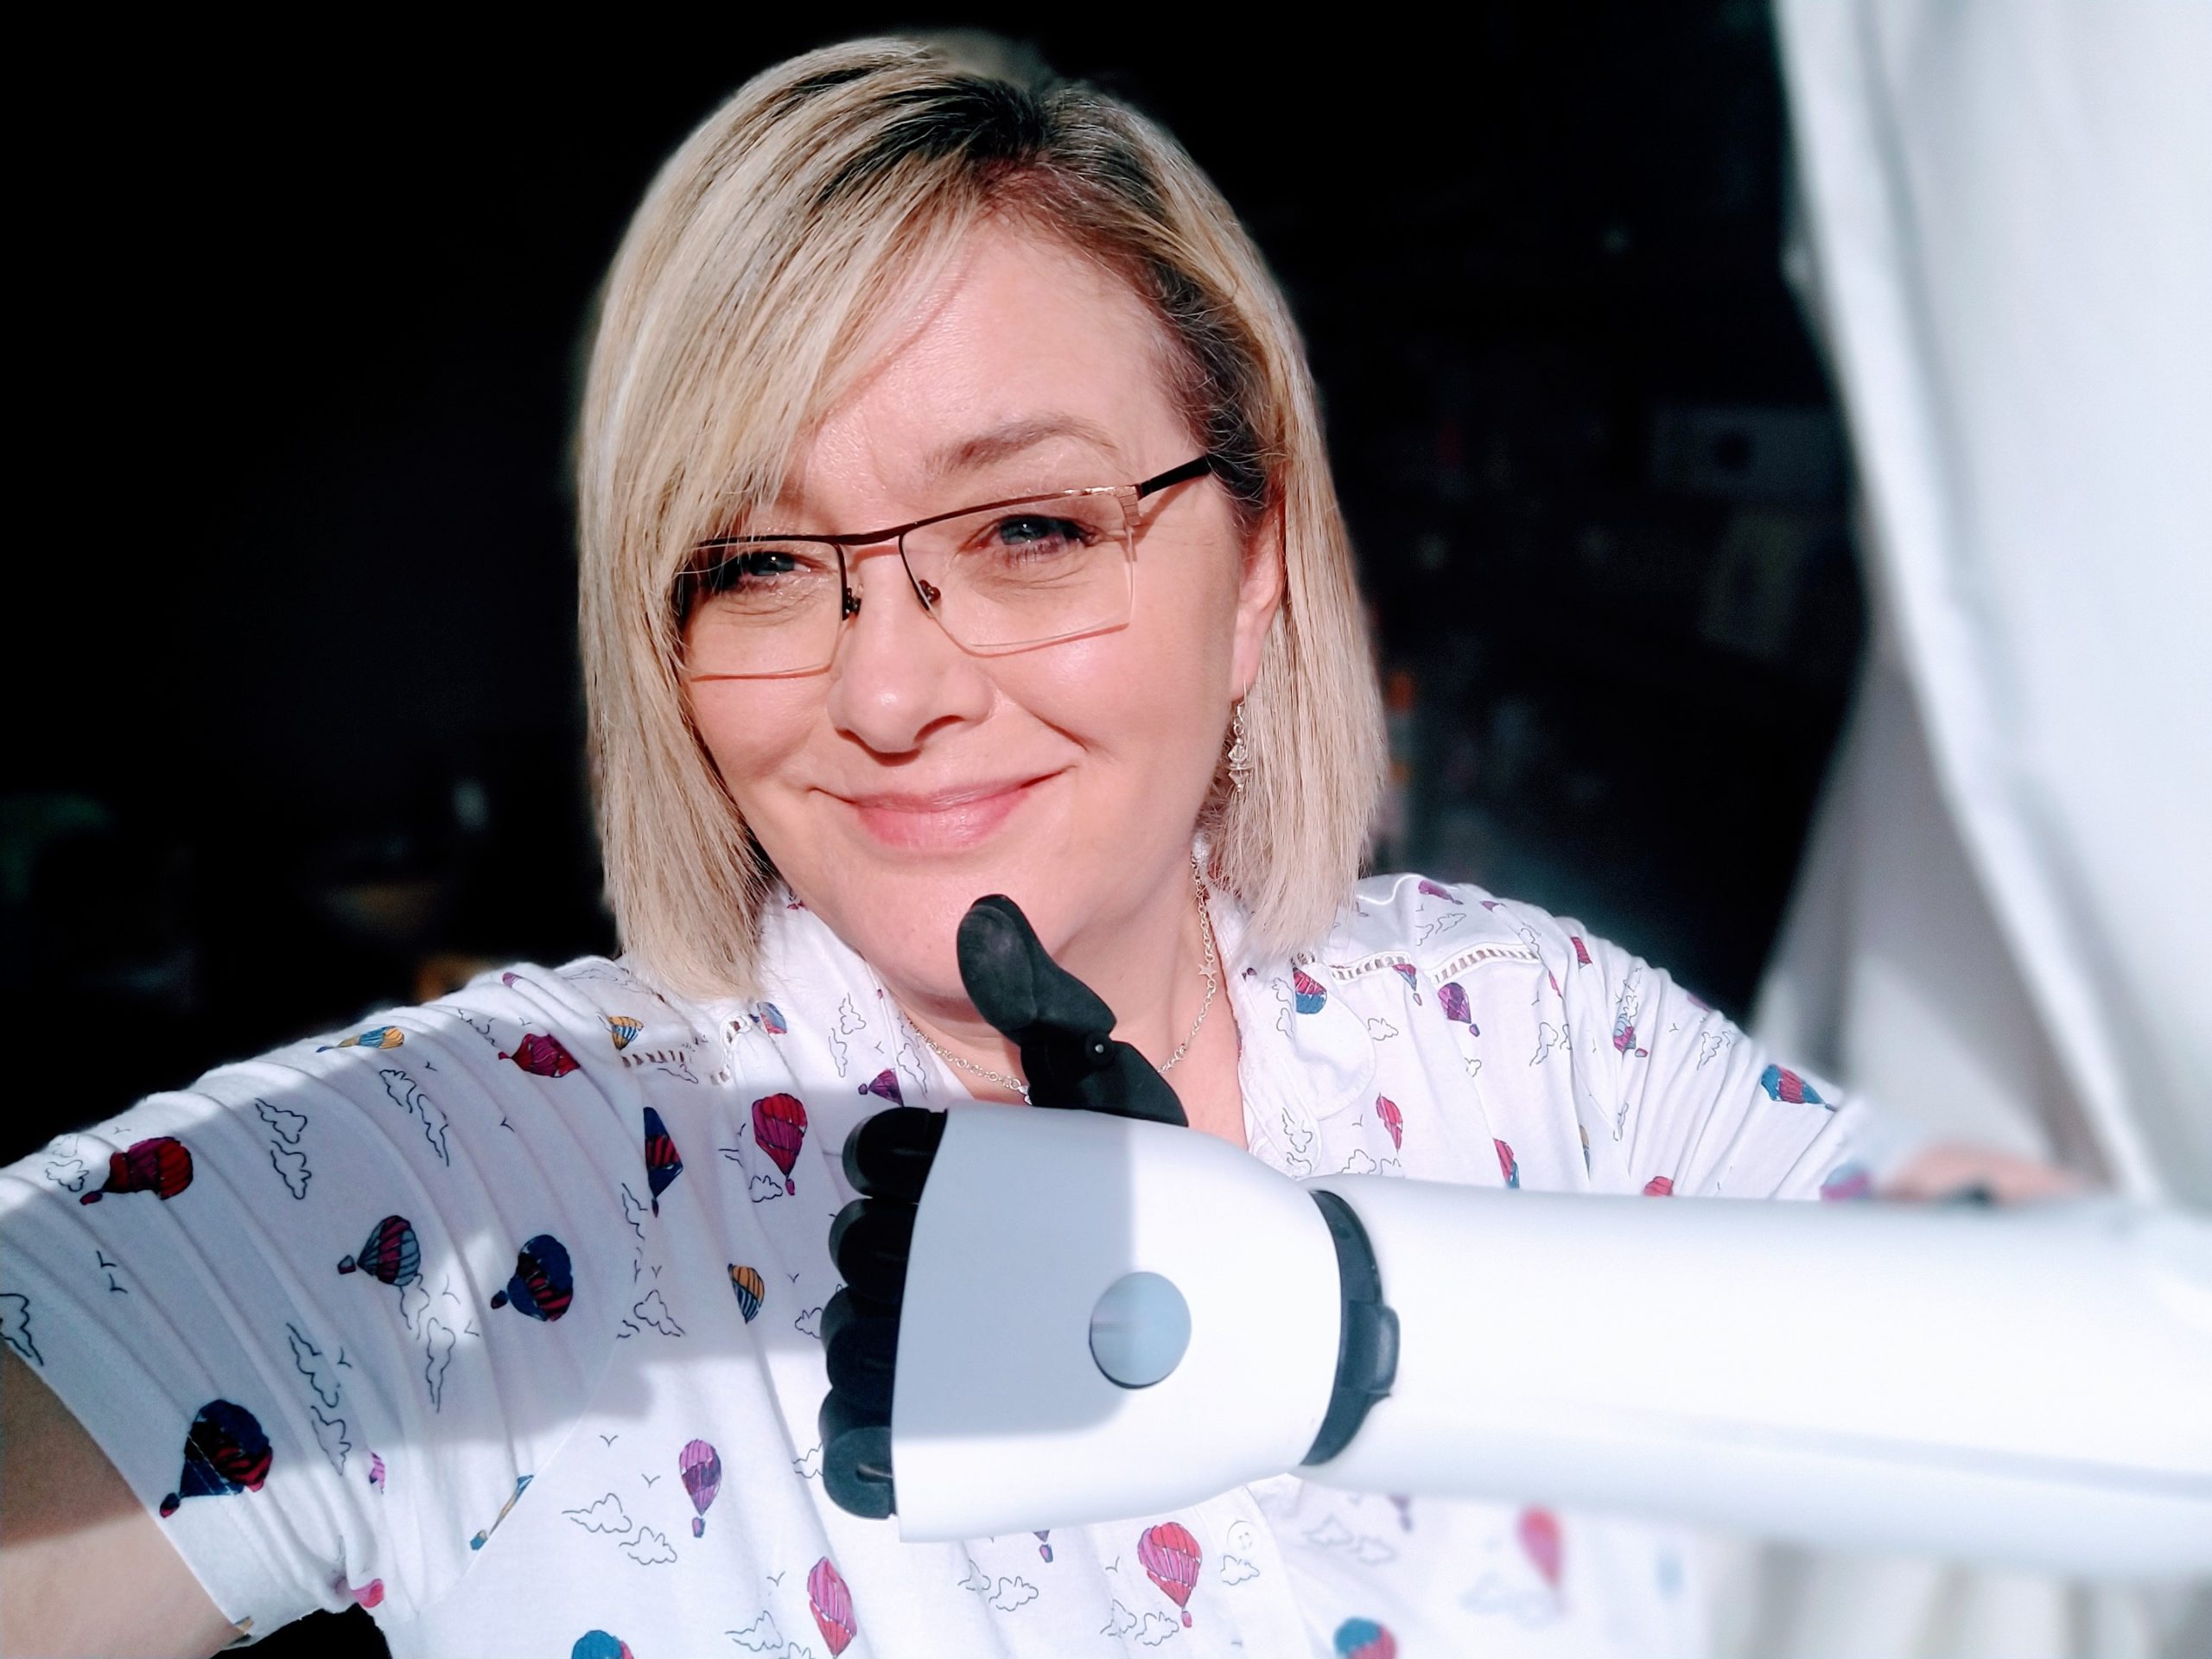 A blonde woman wearing glasses and a white polo shirt with colourful hot balloon print gives a thumbs up sign with her white bionic arm